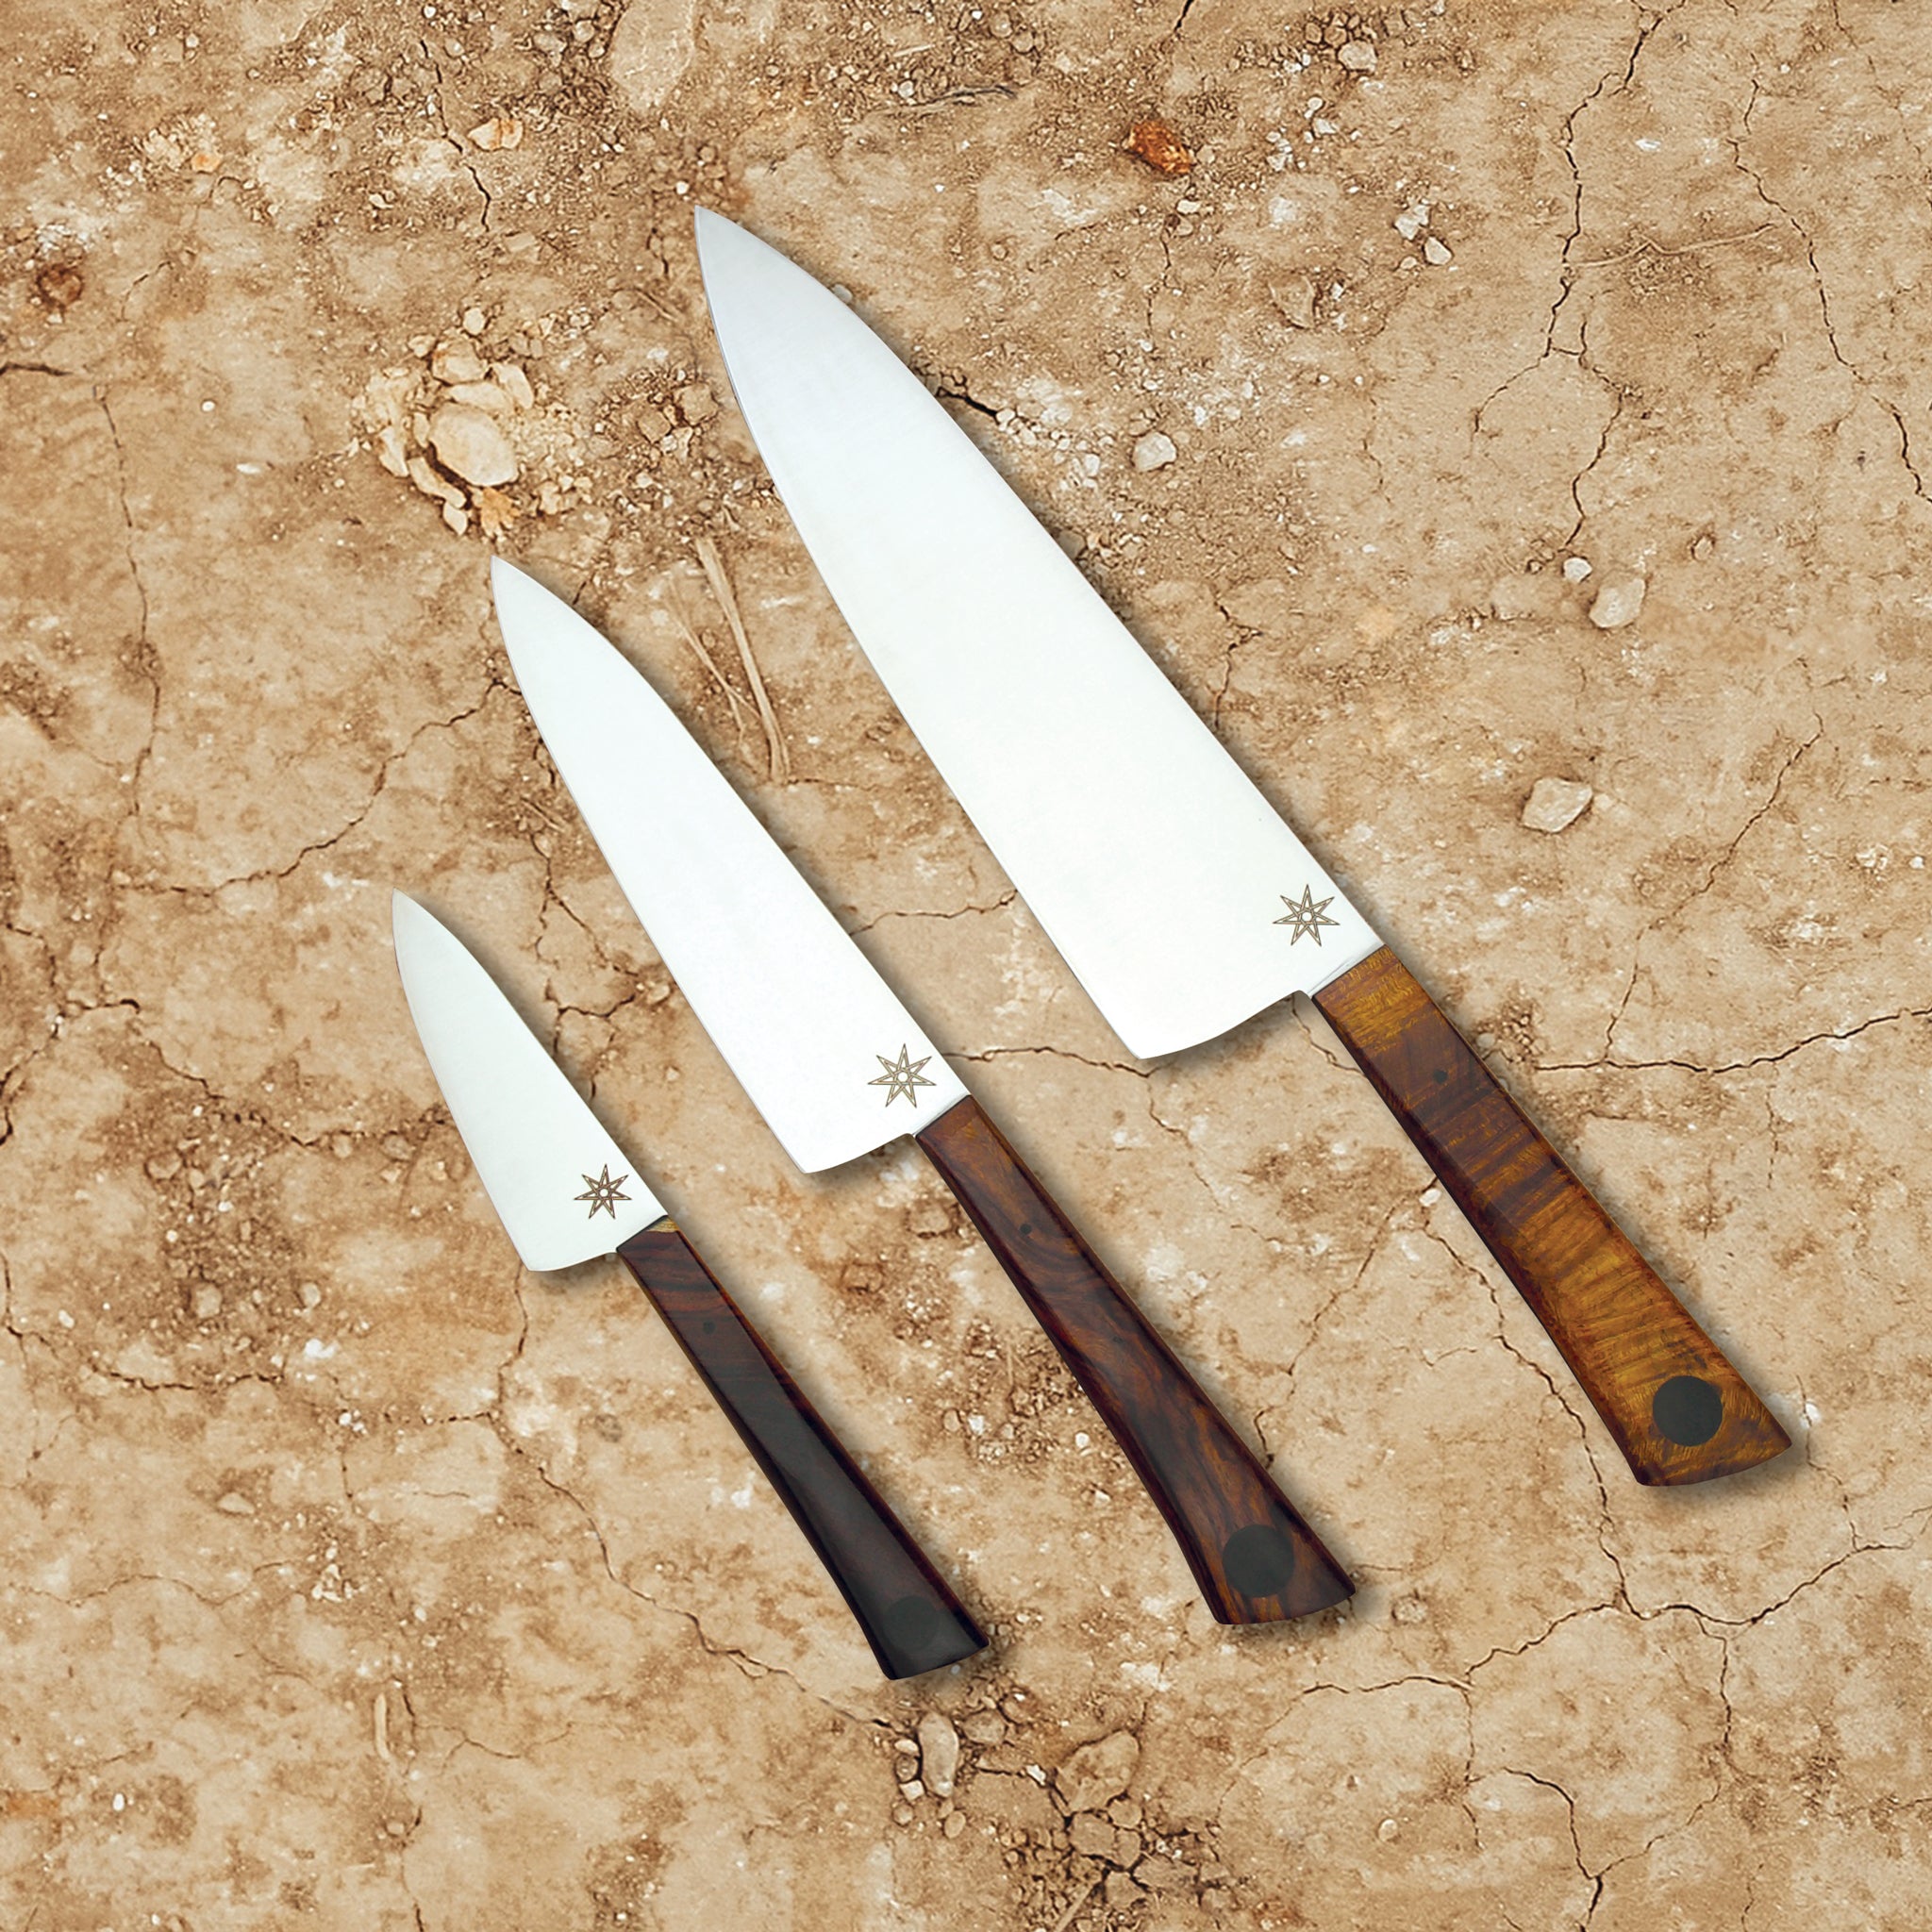 8.5" stainless steel Chef and 6" utility and 3" paring knives by Town Cutler featuring Olneya  Desert Ironwood handle. Sold as set.